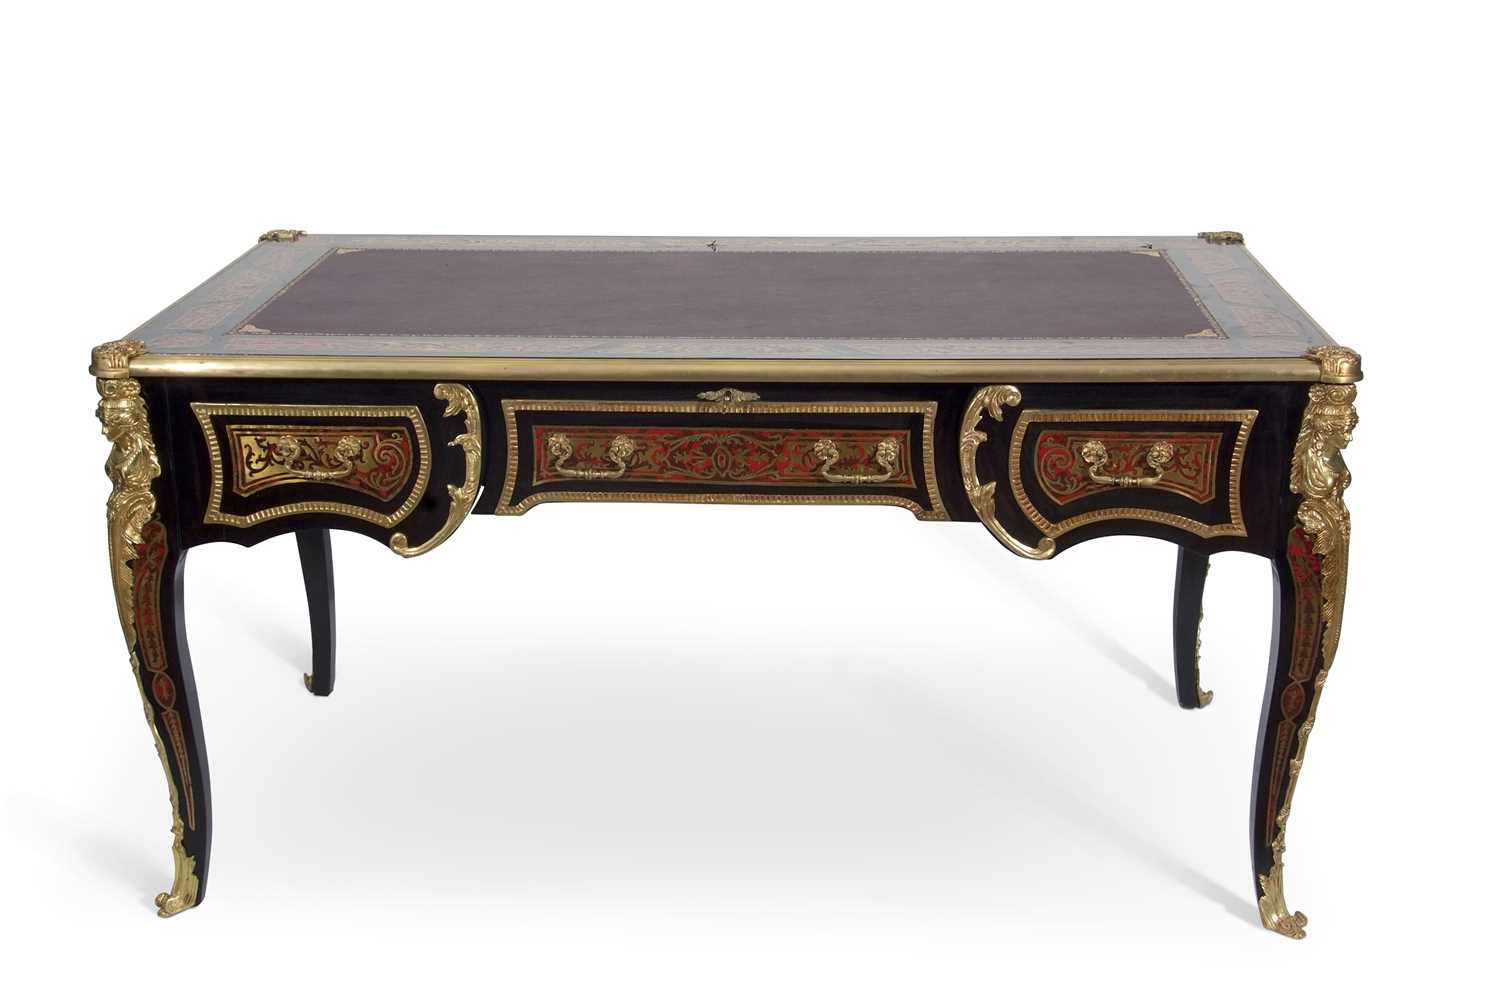 Reproduction boule style desk with inset writing surface over three drawers with ornate brass